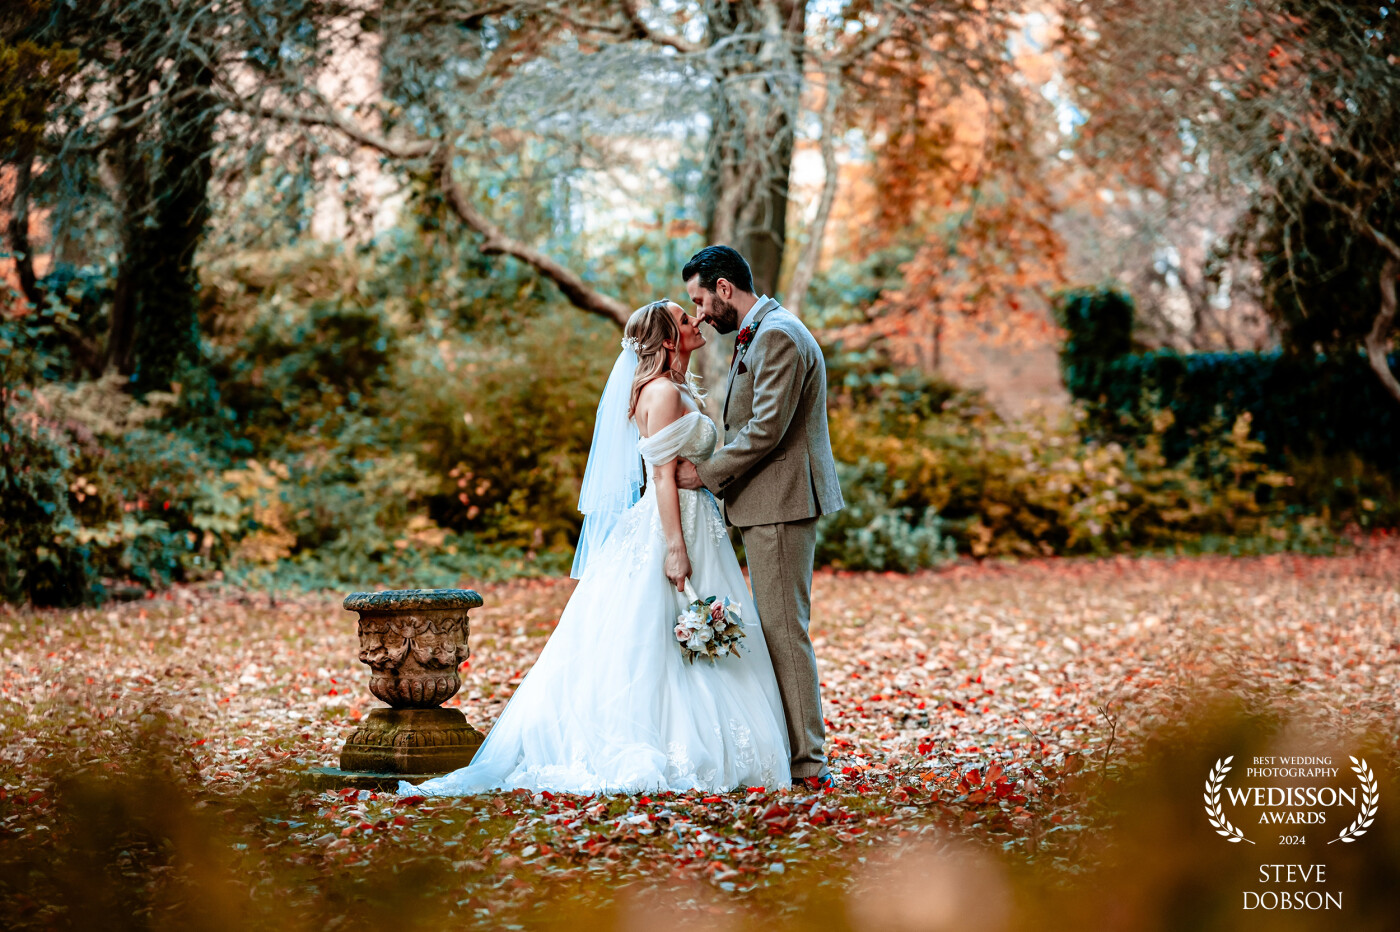 Rachel and Marc at the The Mansion House in Jesmond, Newcastle Upon Tyne. Rachel braved the cold on a brisk November day to get some great shots at this beautiful historic venue.